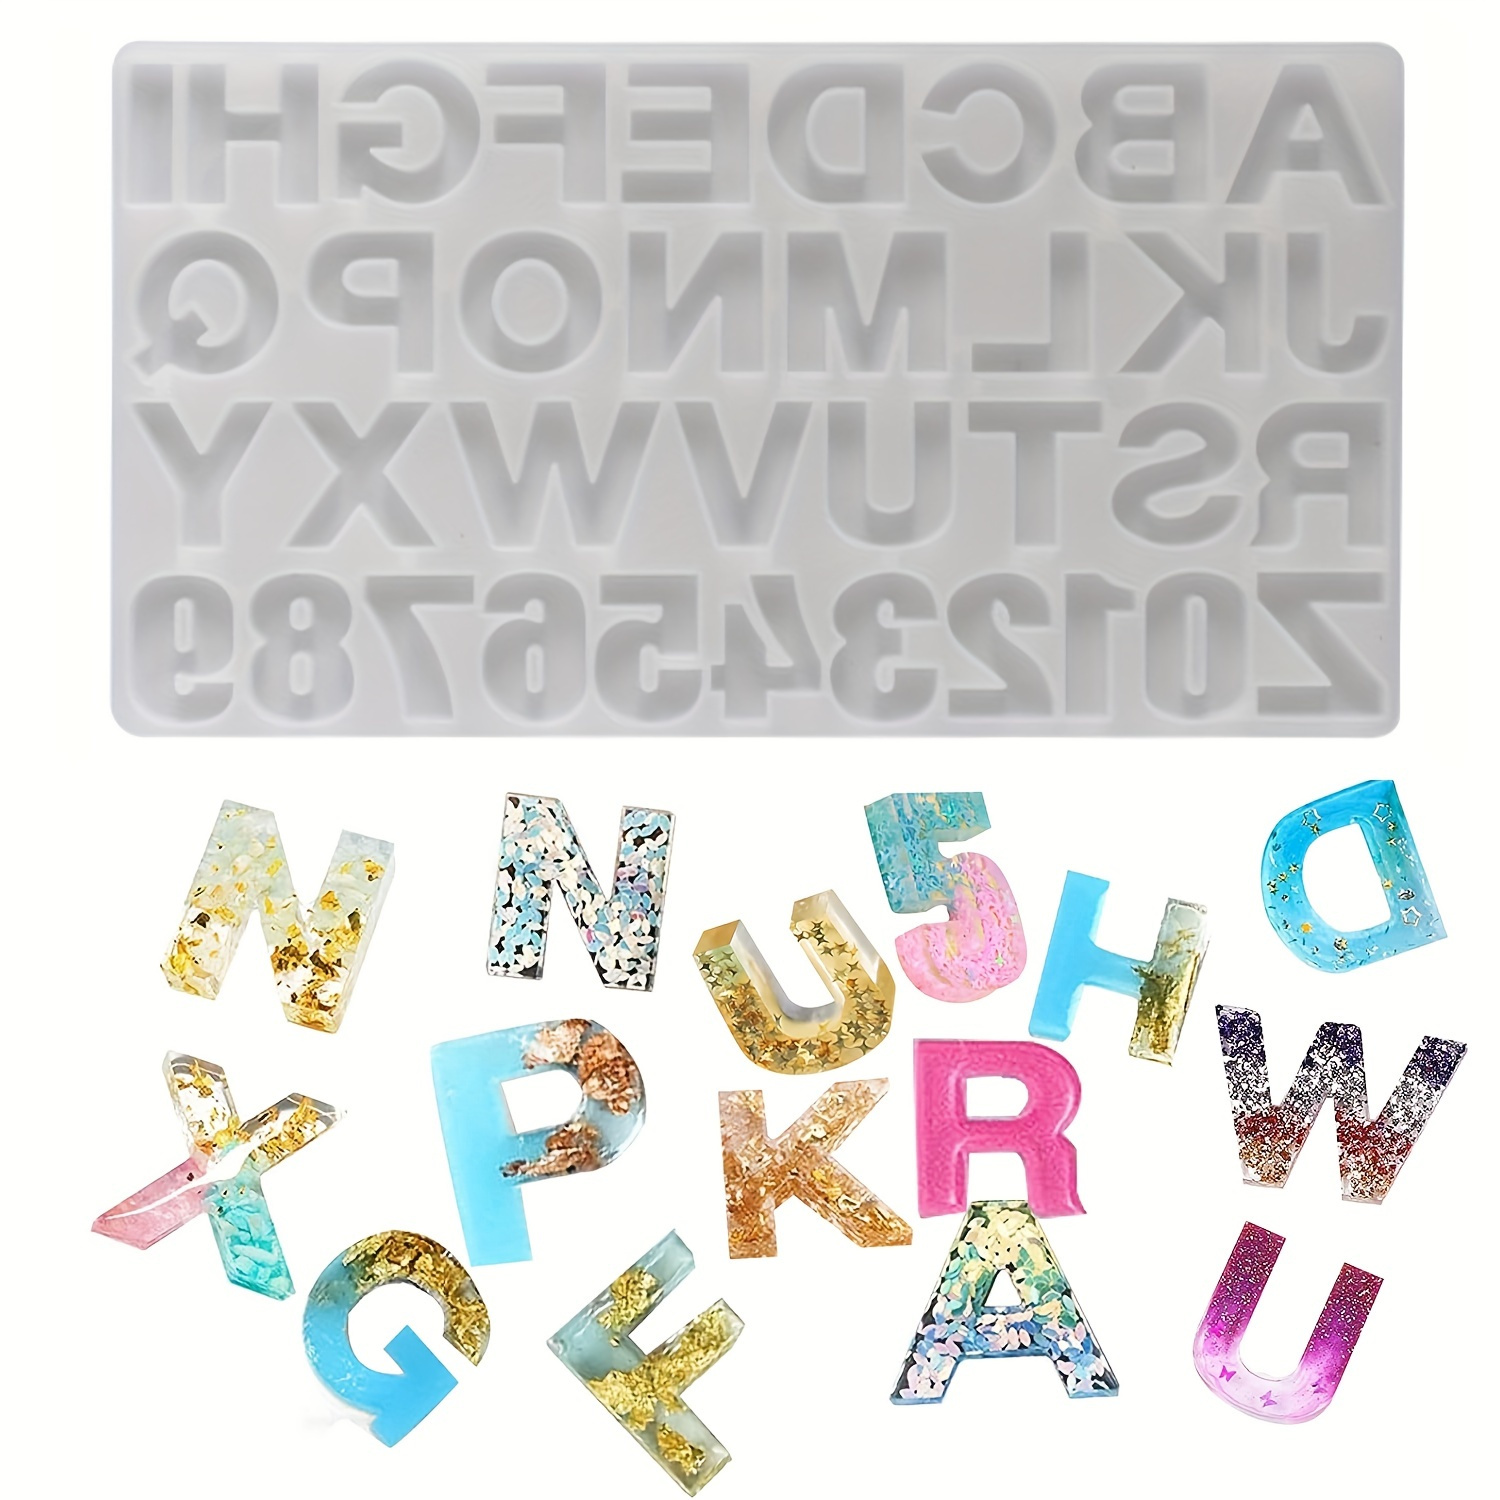 

Reversed Resin Casting Alphabet Pendant Silicone Mold, Sturdy Letter & Number Silicone Mold For Epoxy Resin Crafts, Resin Keychains, Crayons, Clay Crafts Making (key Rings Not Included)